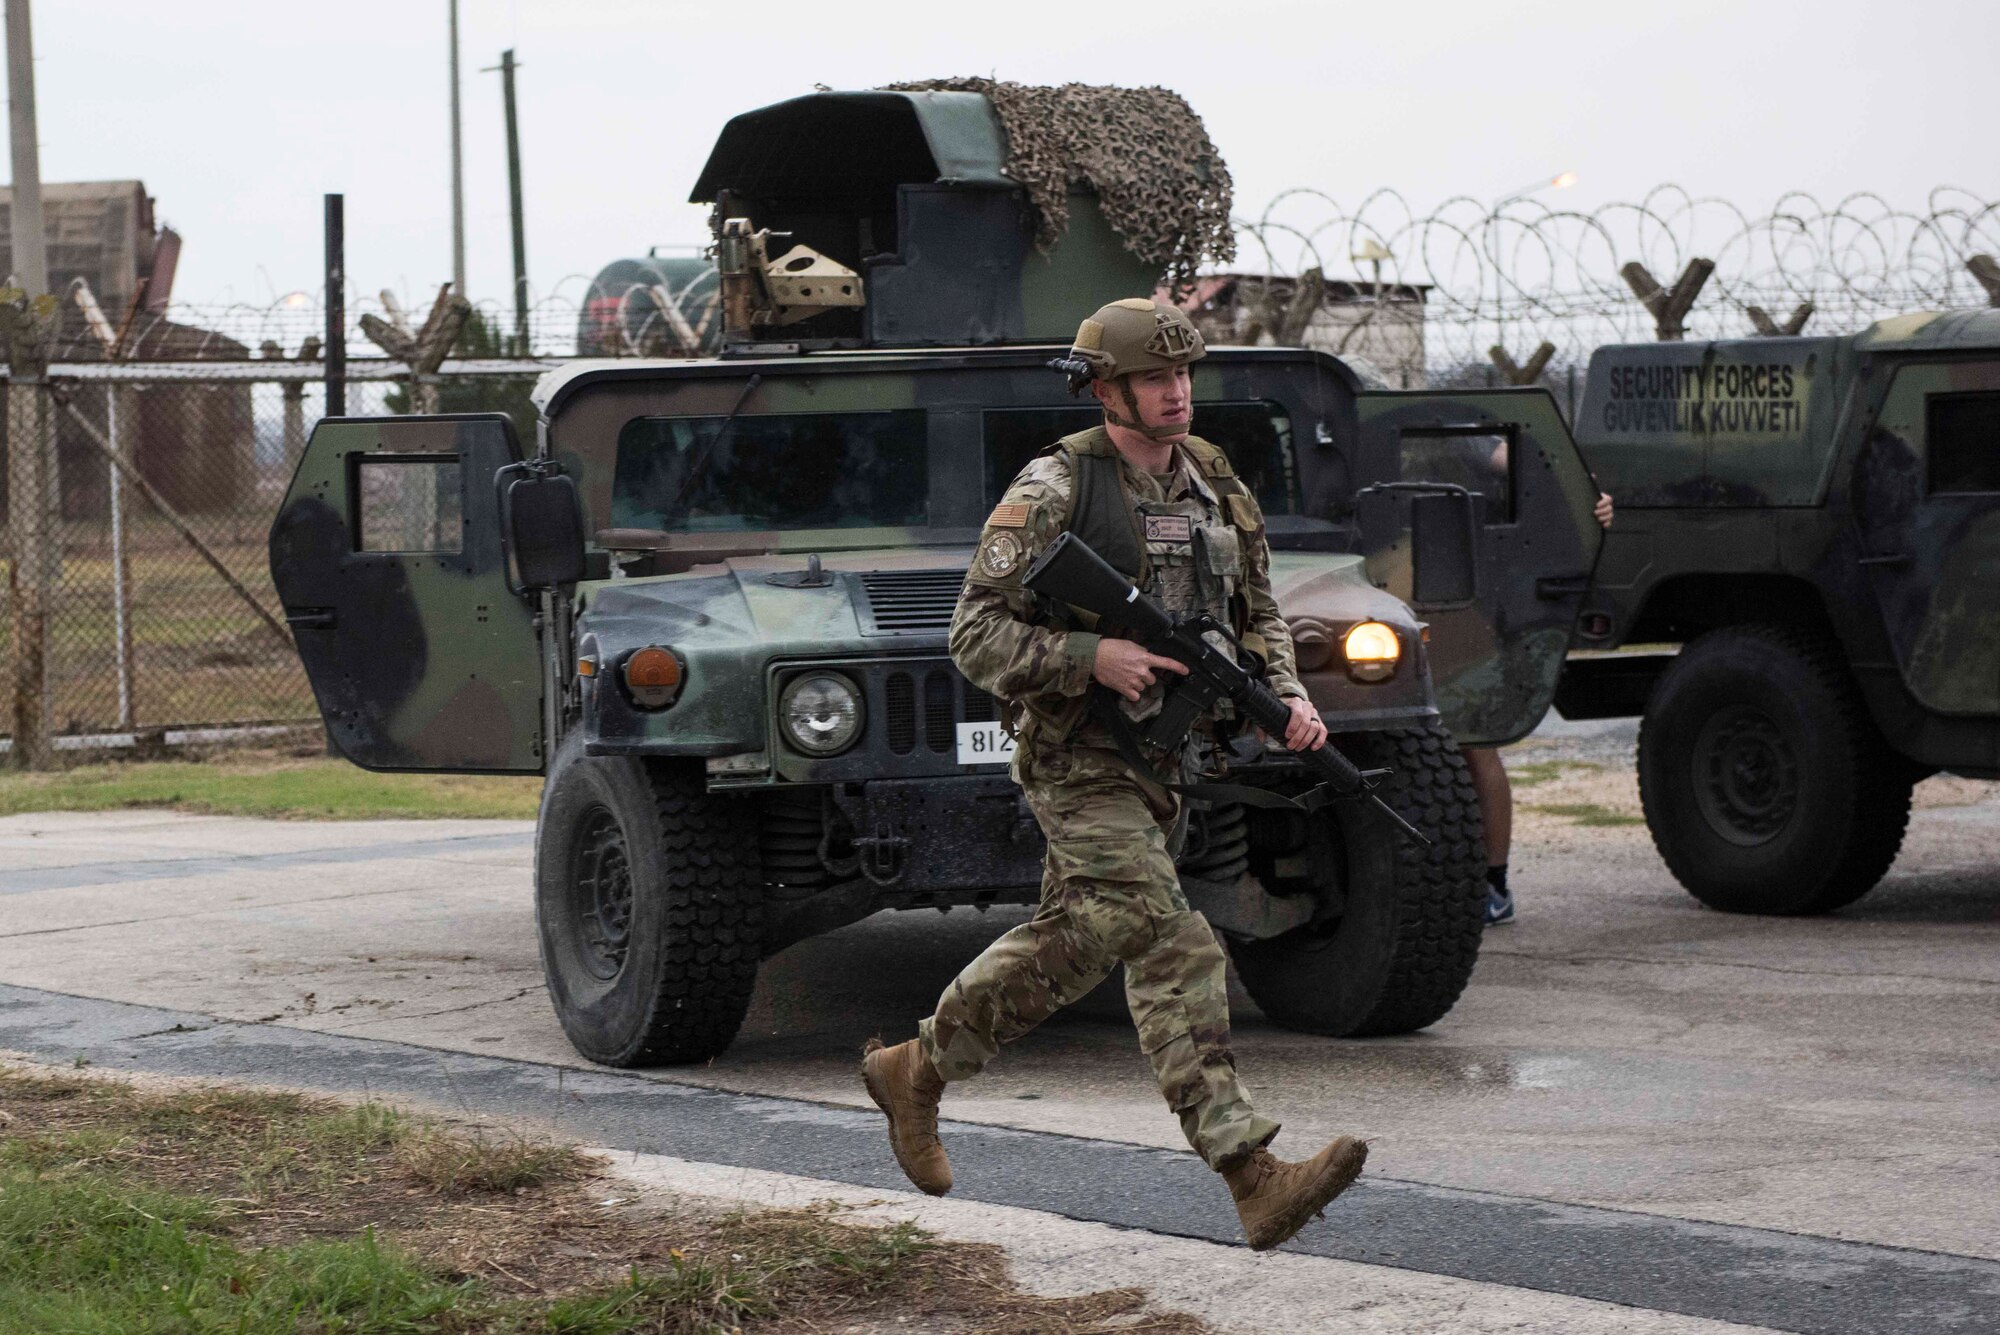 A member of the 39th Security Forces Squadron responds to an alarm during an exercise Nov. 27, 2019, at Incirlik Air Base, Turkey. Security forces Airmen train to respond rapidly to a wide range of emergencies. (U.S. Air Force photo by Staff Sgt. Joshua Magbanua)